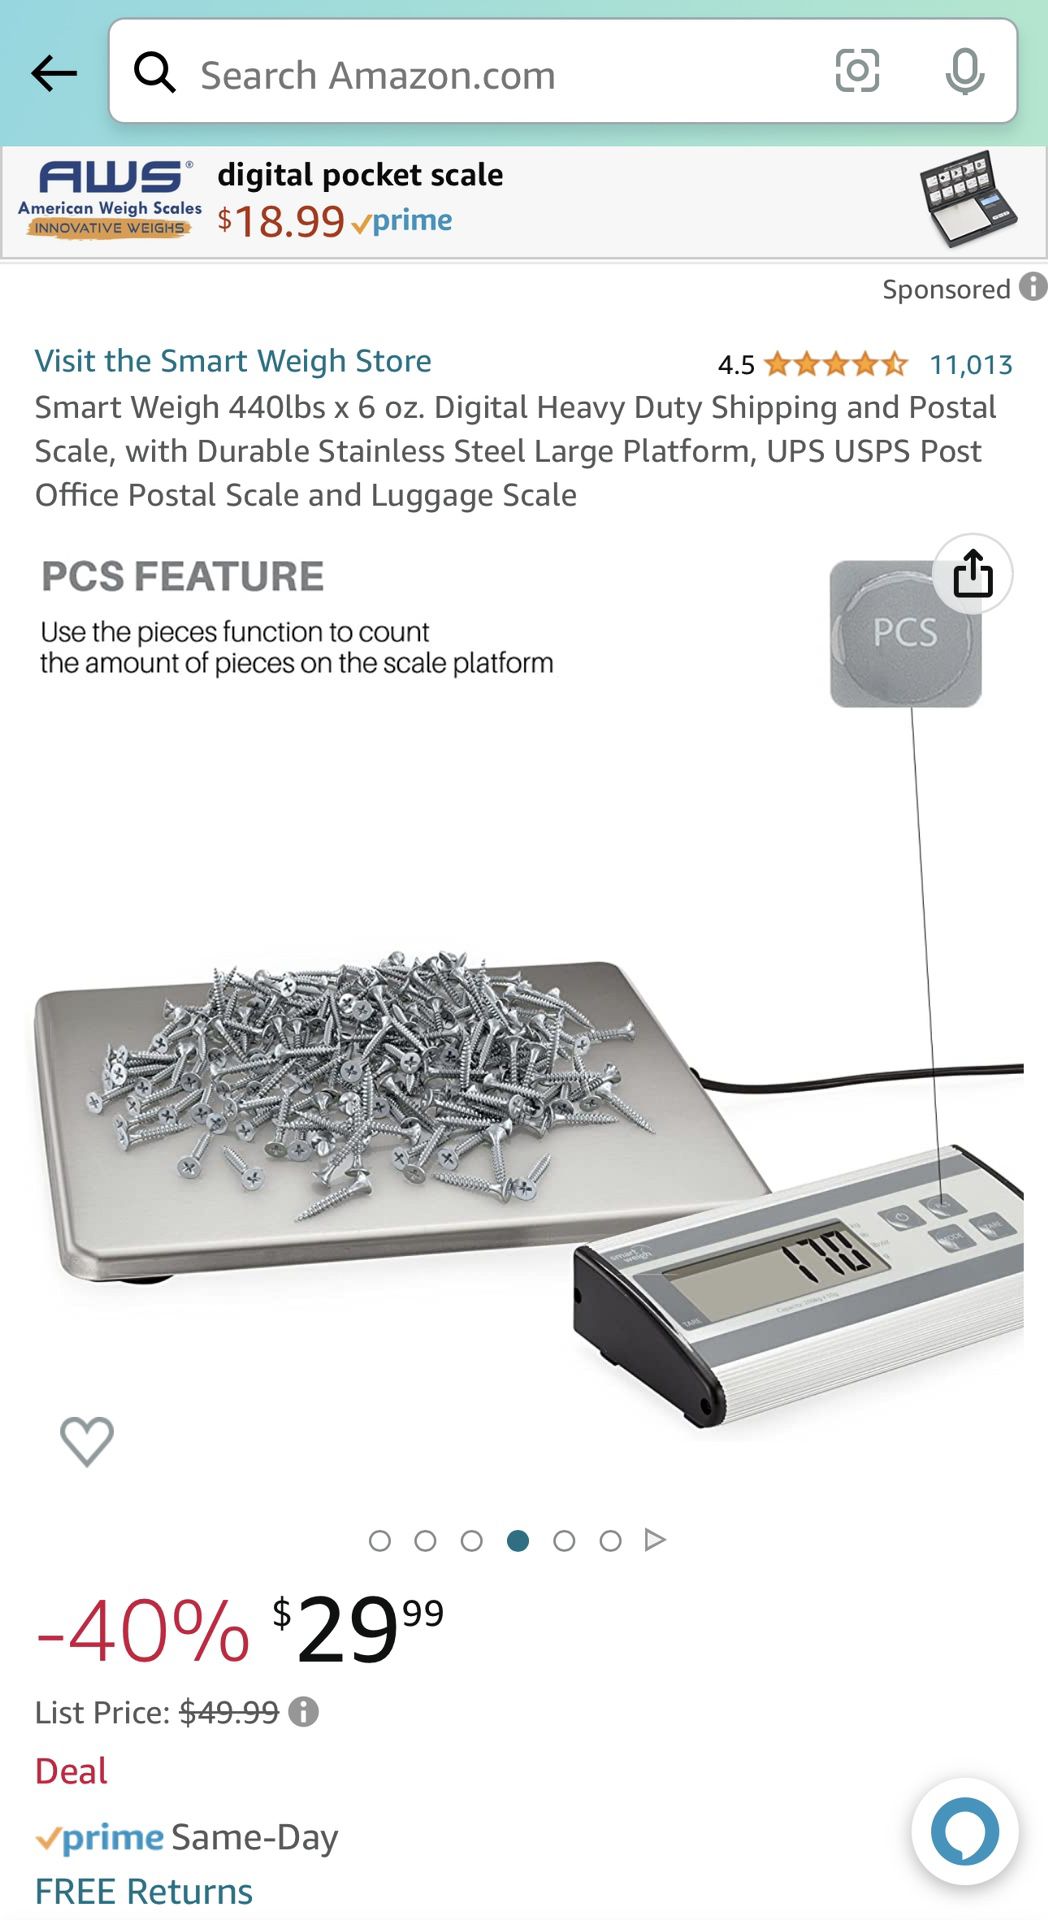 Smart Weigh 440lbs x 6 oz. Digital Heavy Duty Shipping and Postal Scale,  with Durable Stainless Steel Large Platform, UPS USPS Post Office Postal